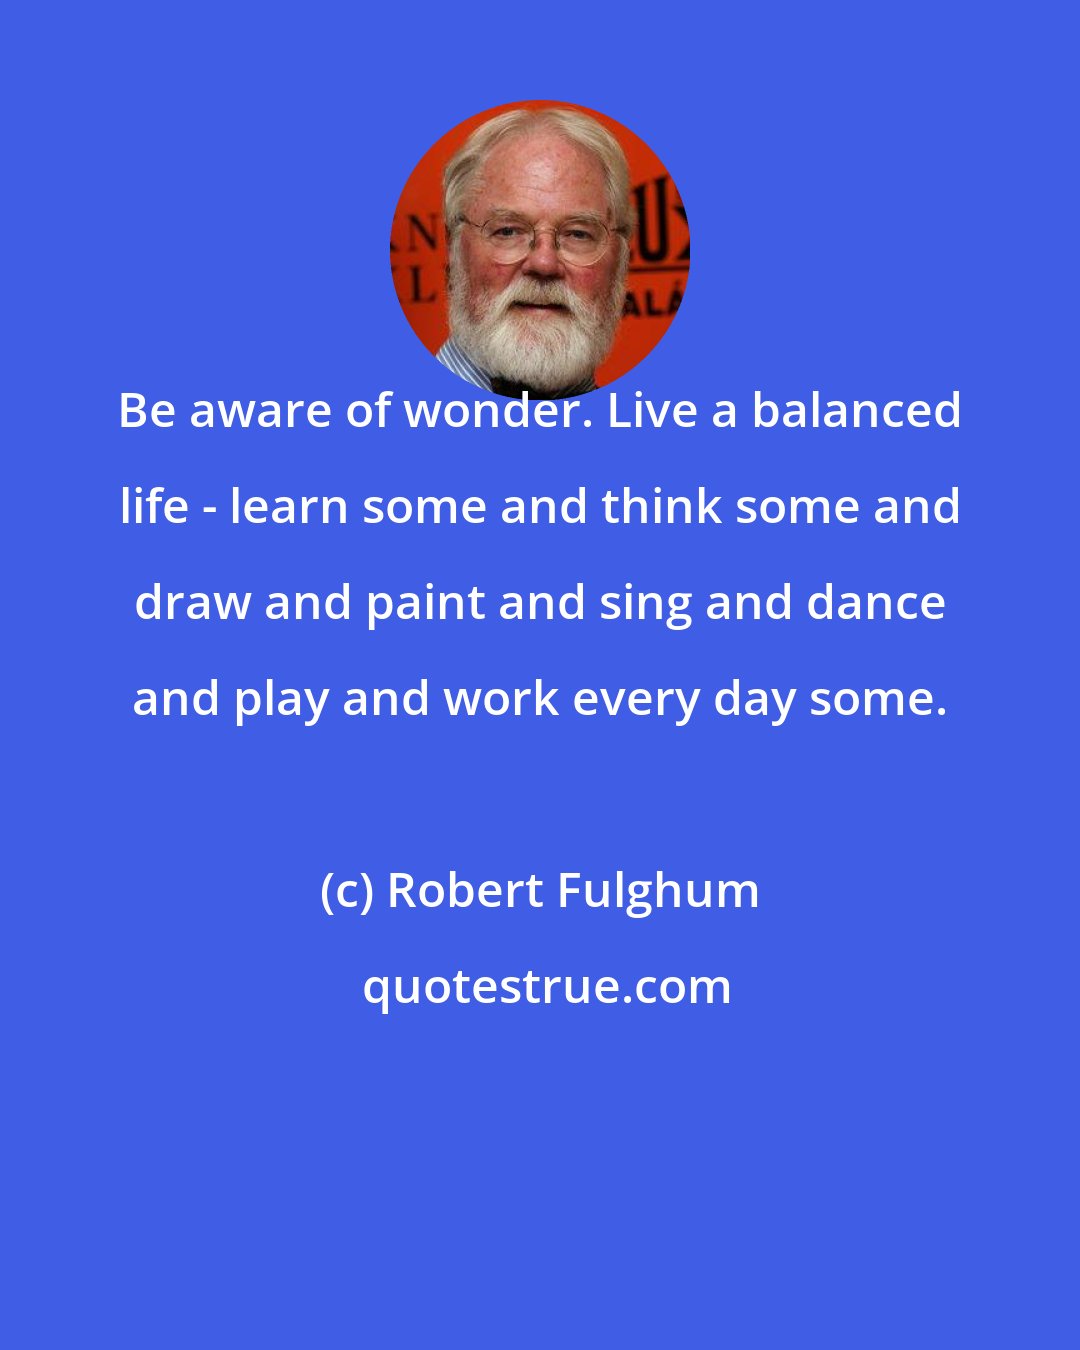 Robert Fulghum: Be aware of wonder. Live a balanced life - learn some and think some and draw and paint and sing and dance and play and work every day some.